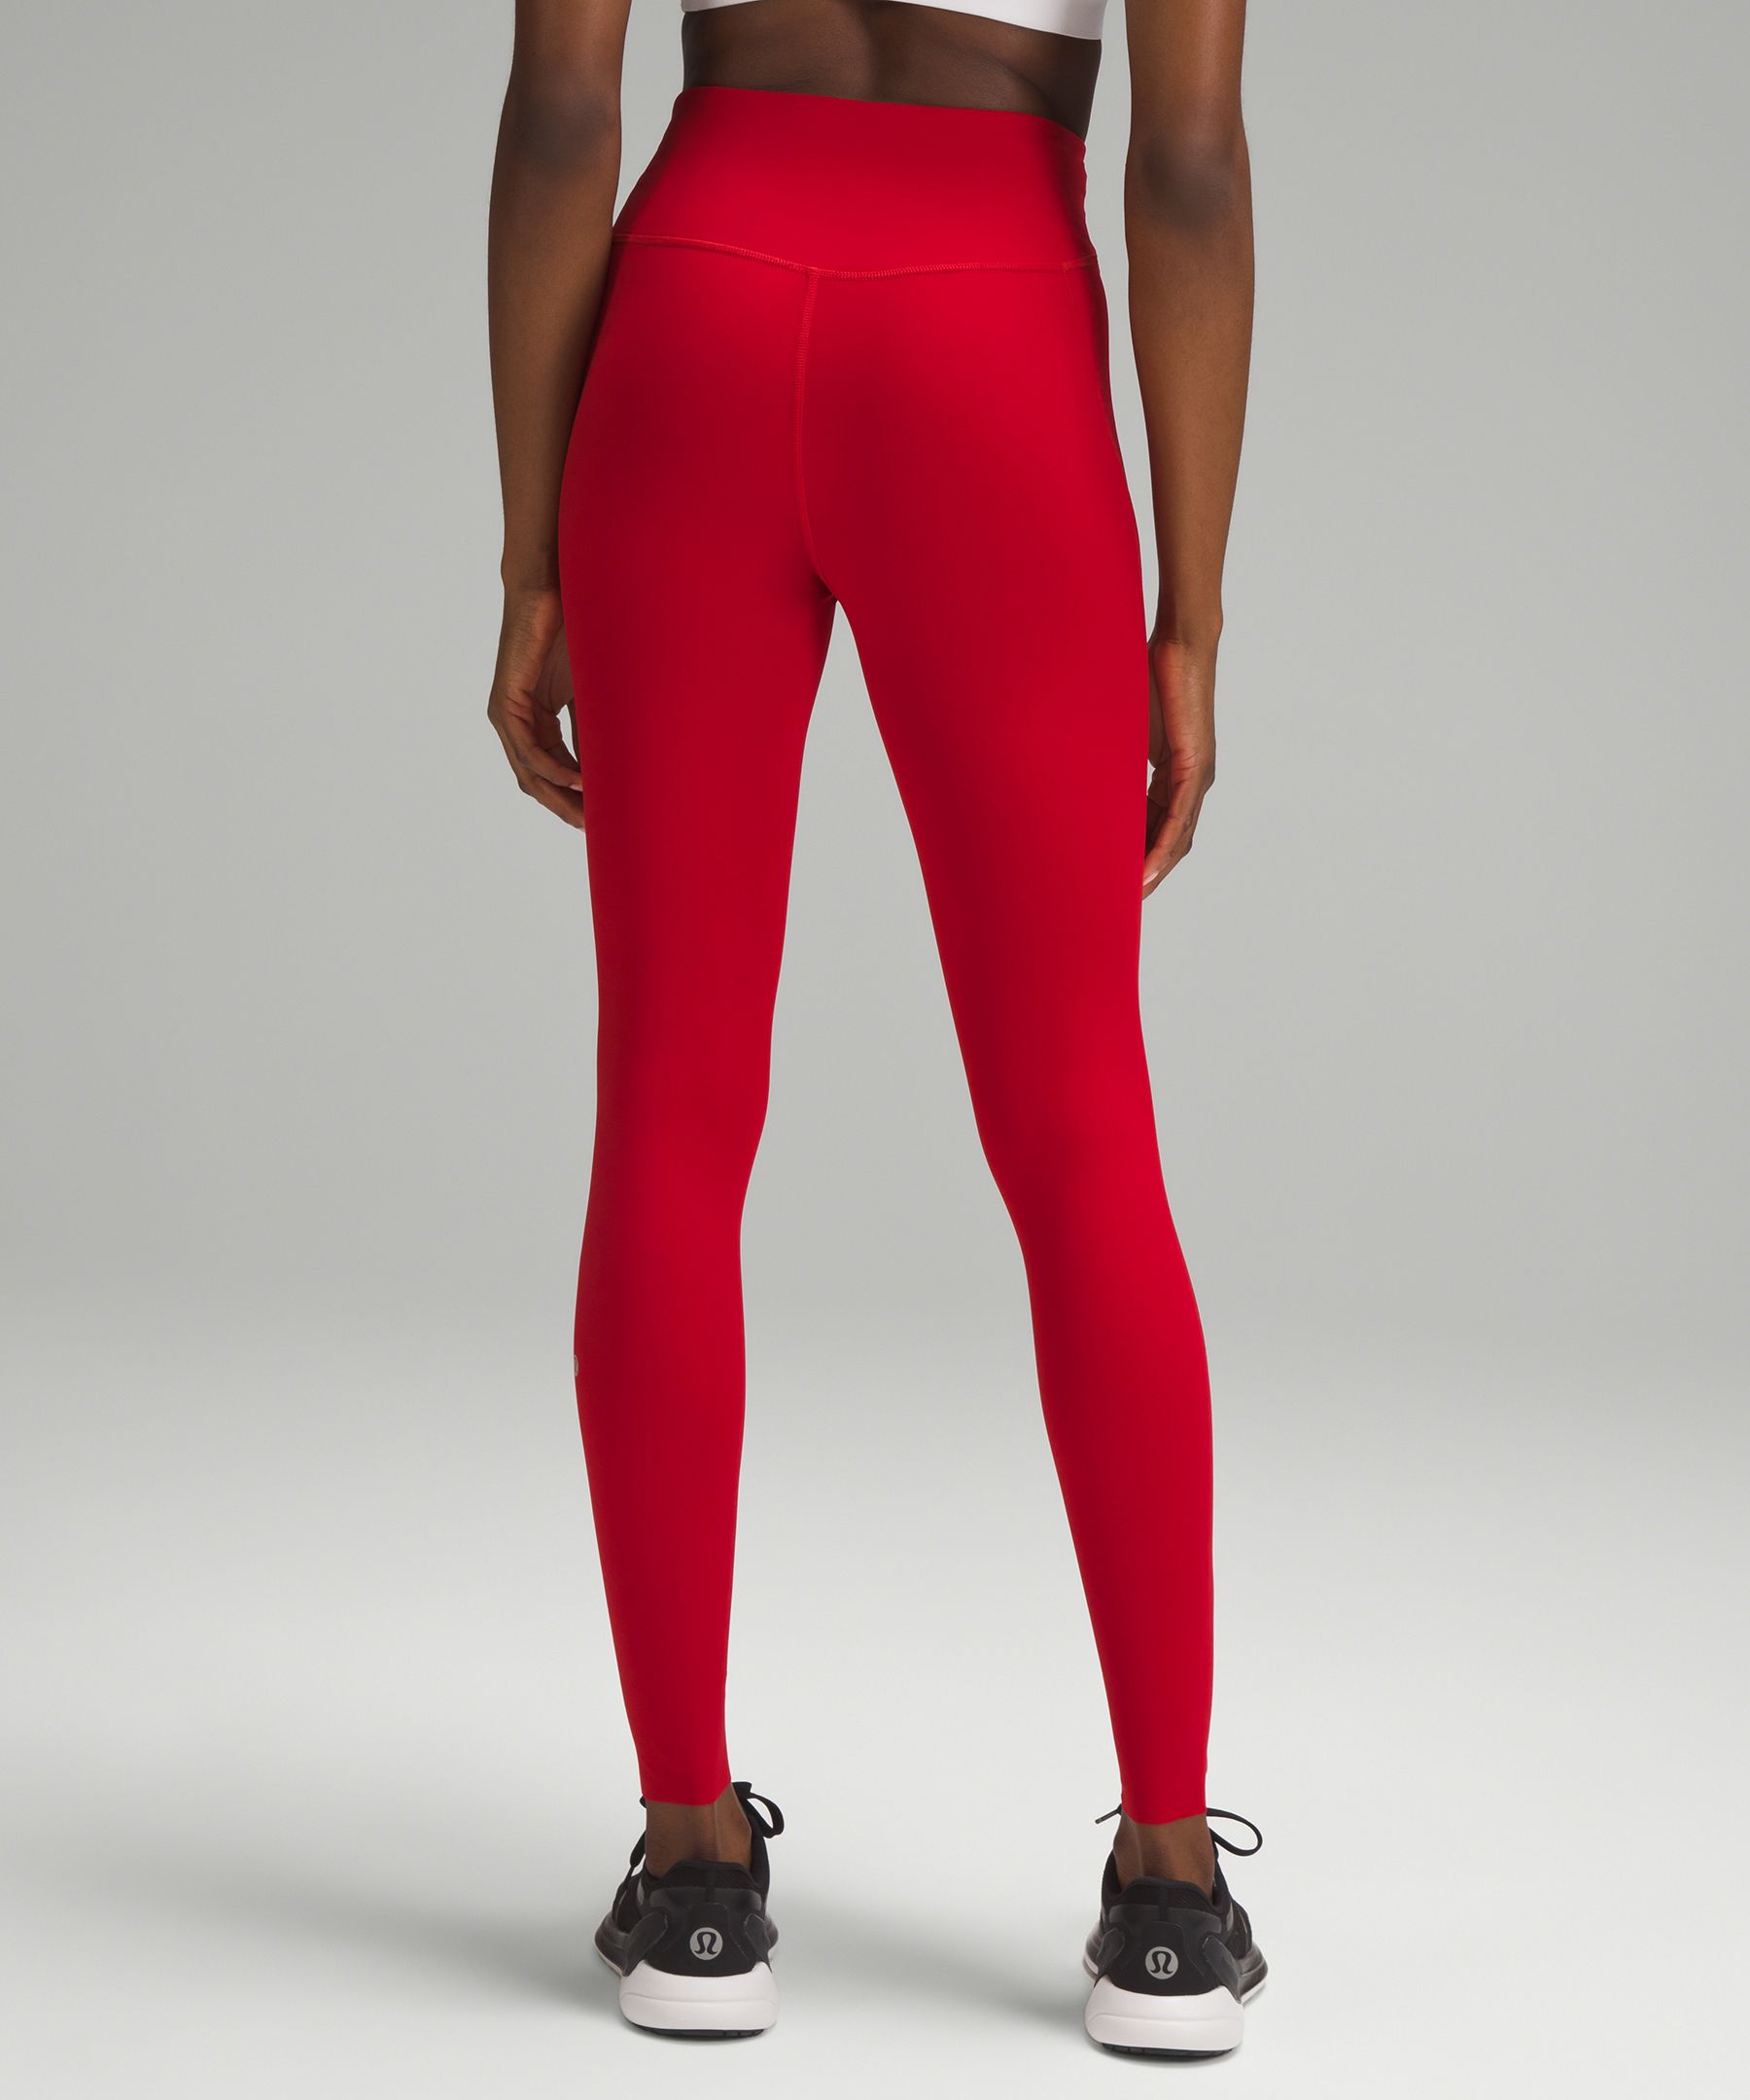 Base Pace High-Rise Tight 28, Women's Leggings/Tights